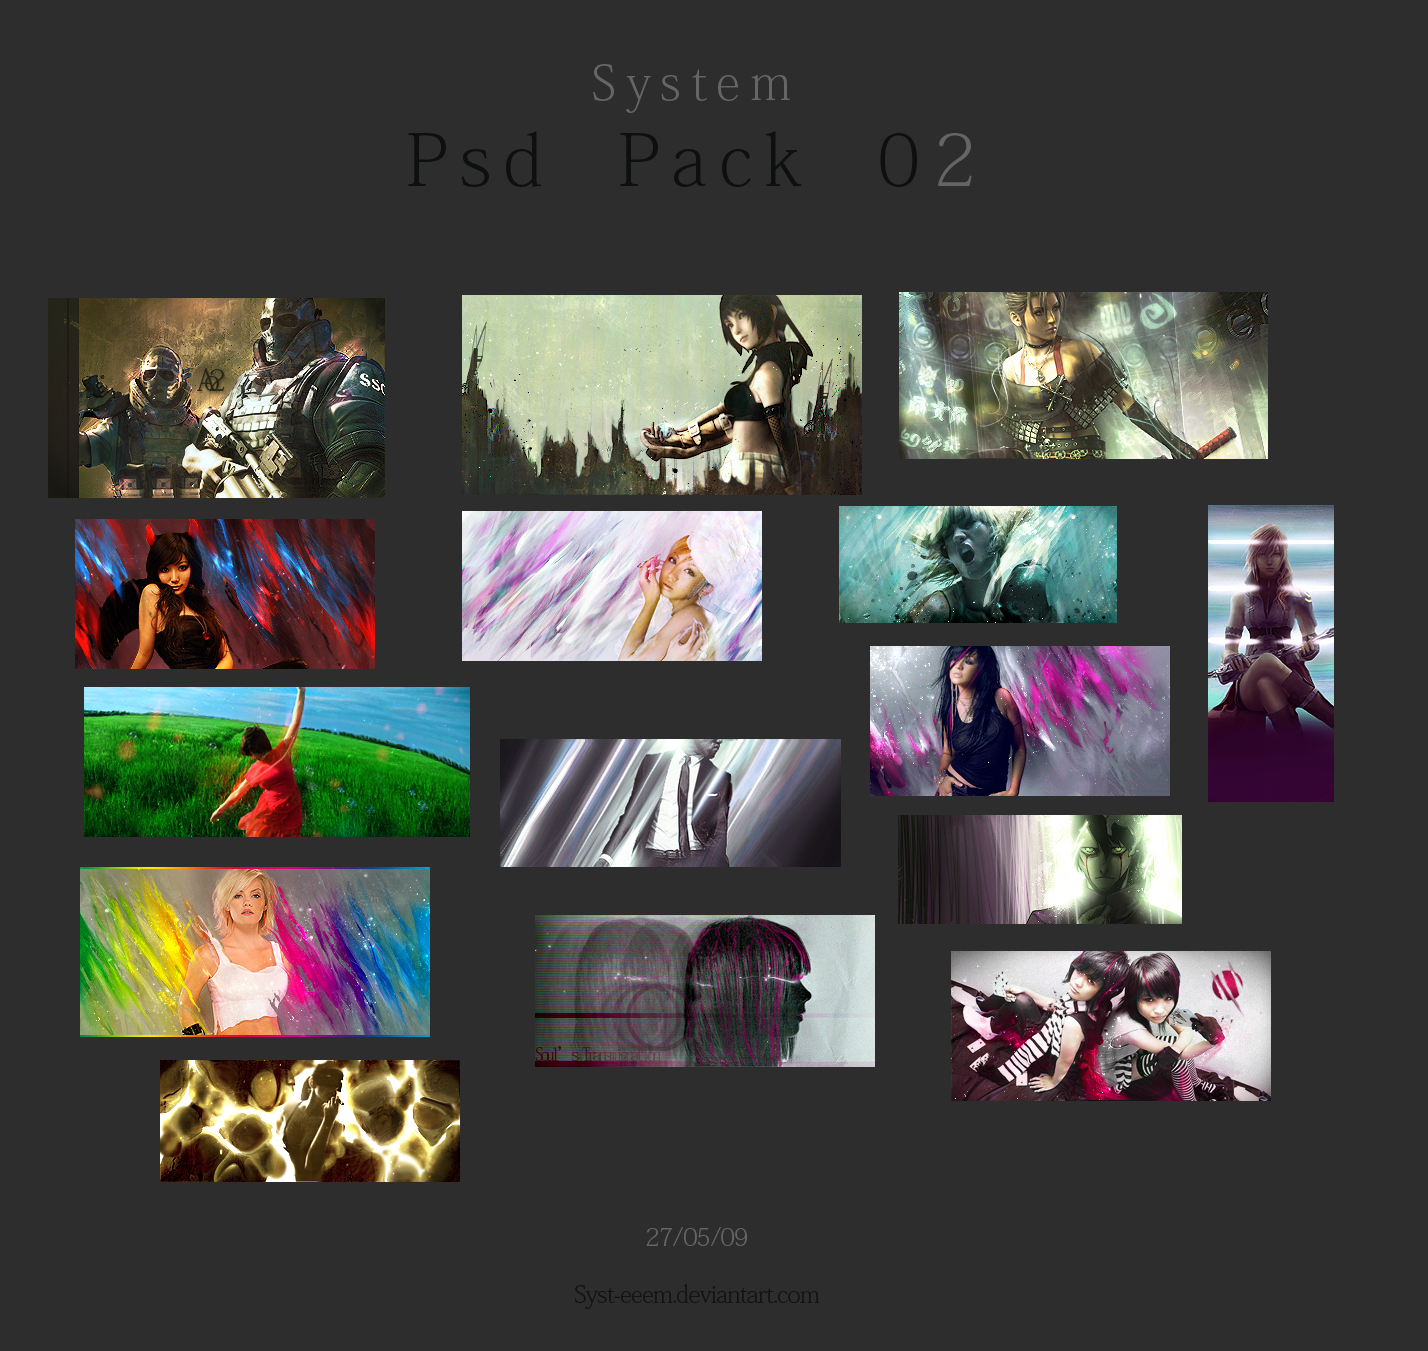 Psd_Pack_02_by_Syst_eeem